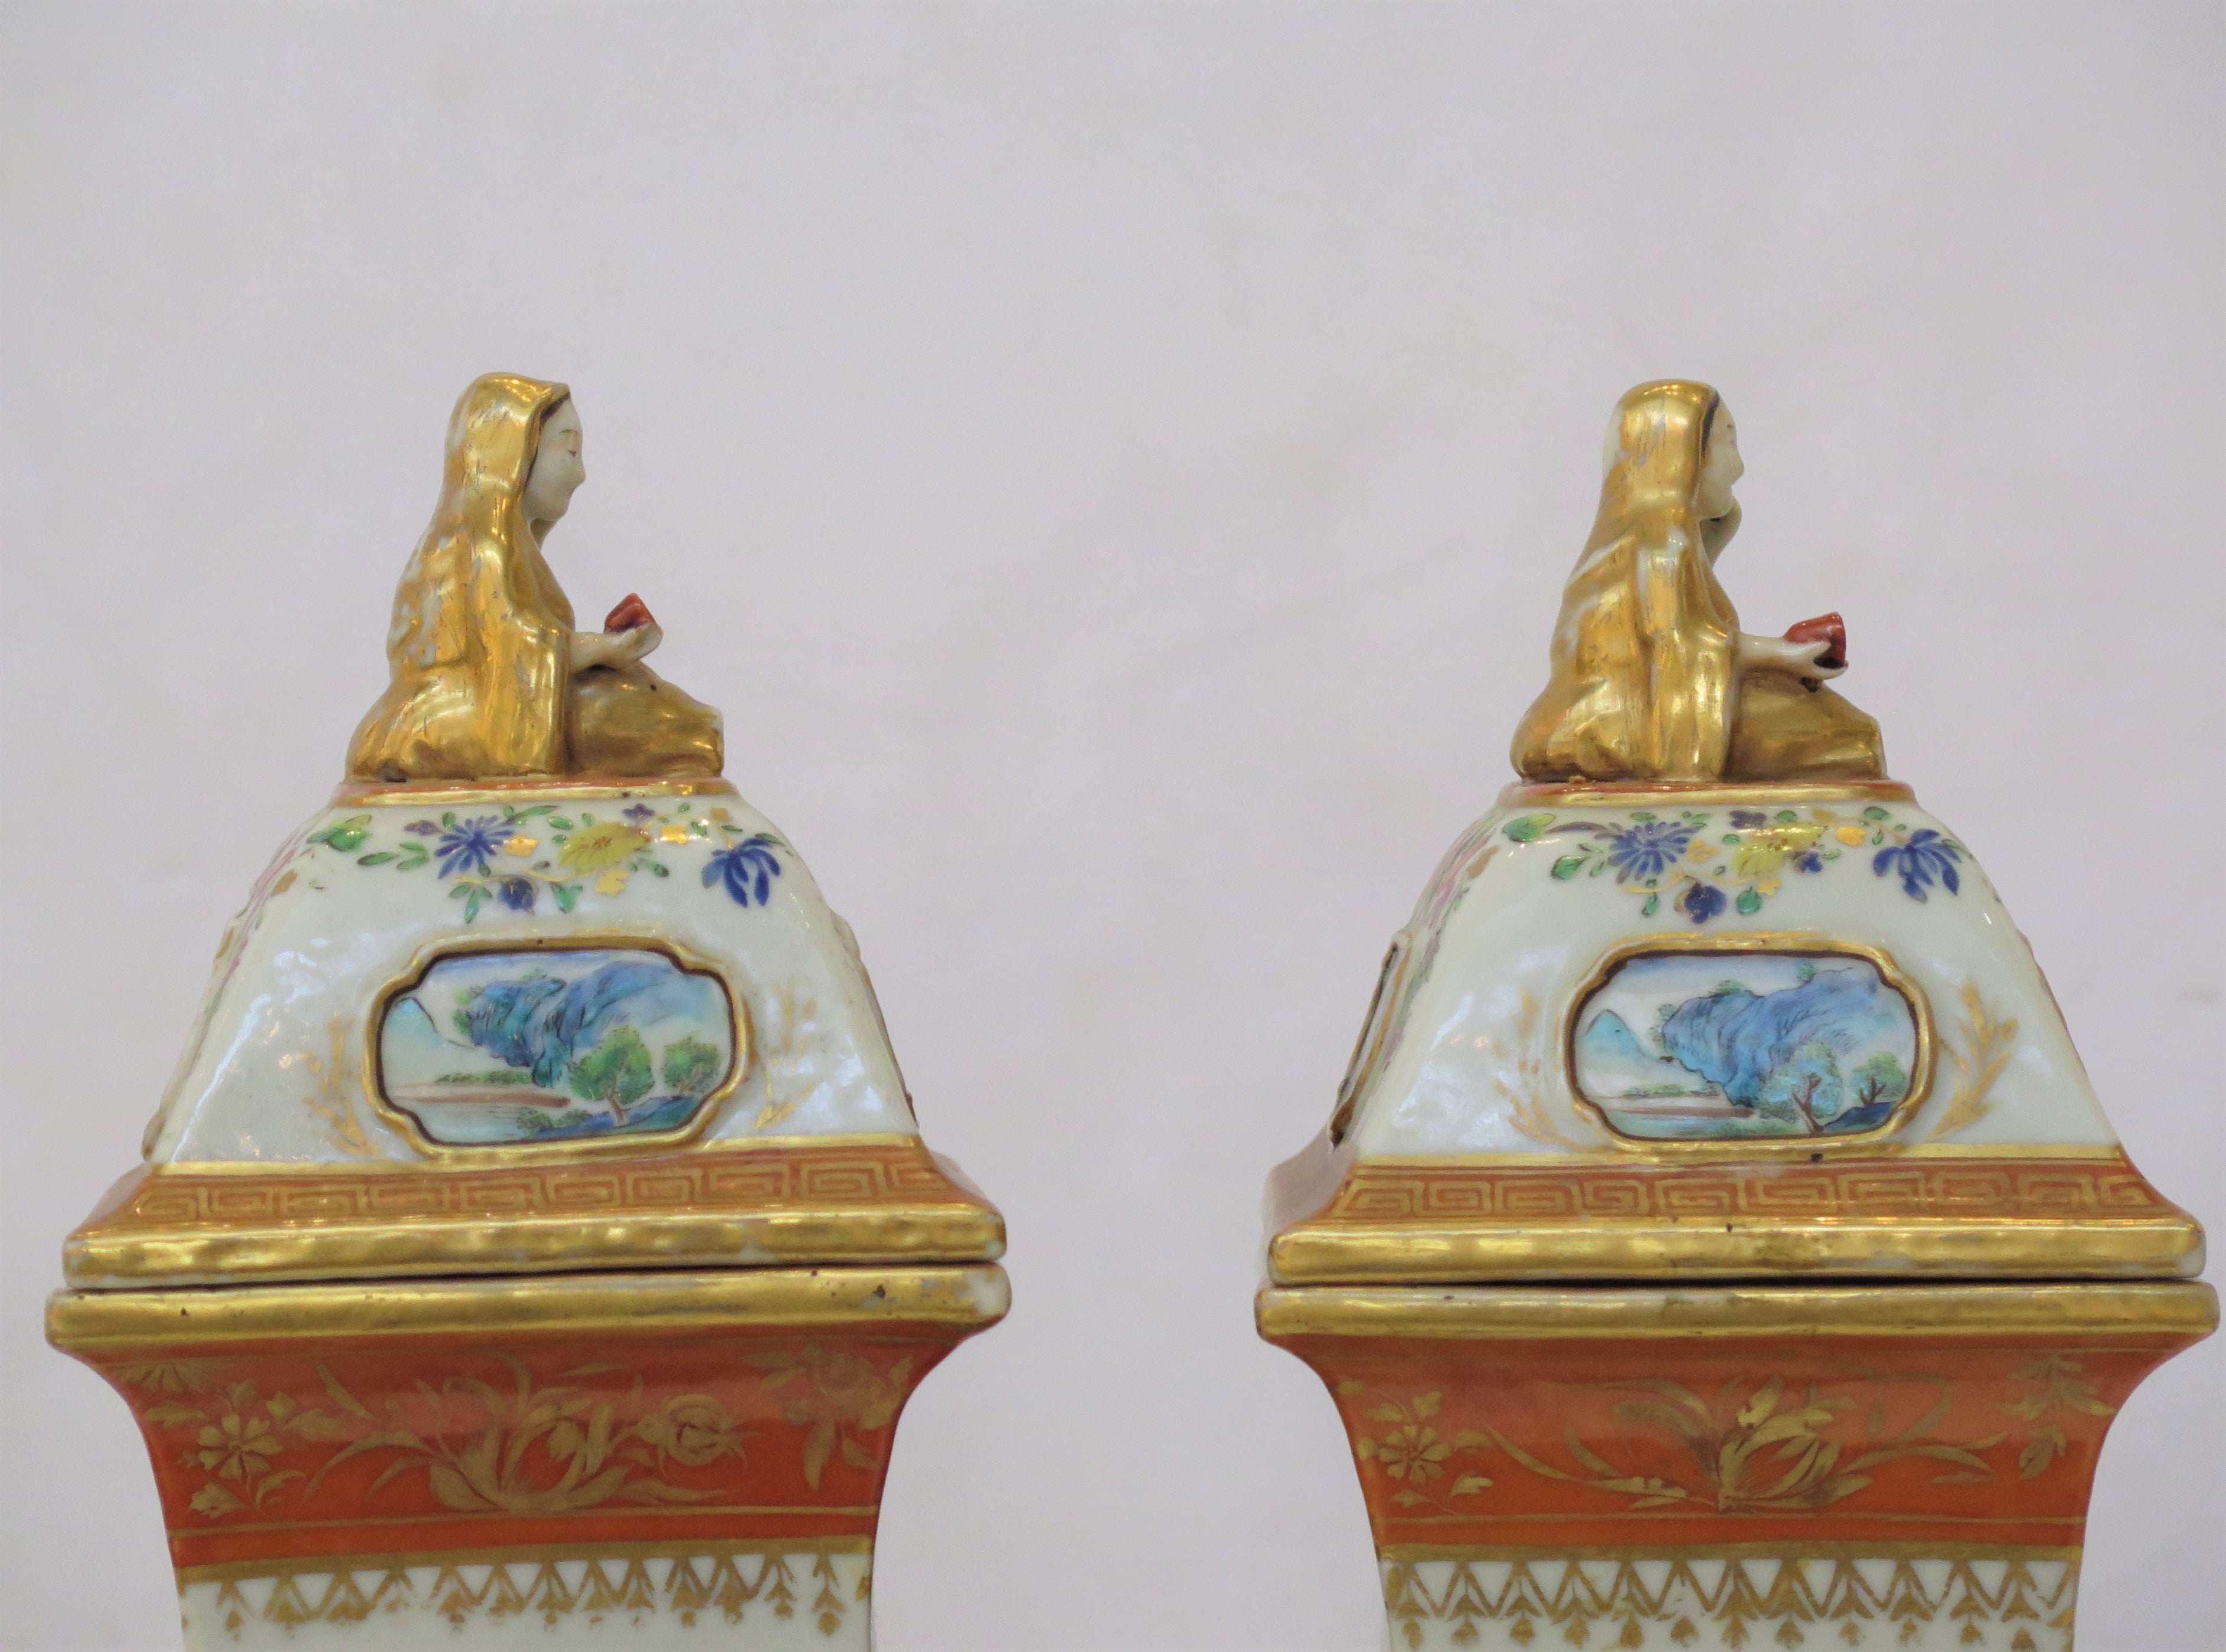 Very Good Quality Large Chinese Lidded Jars / PAIR